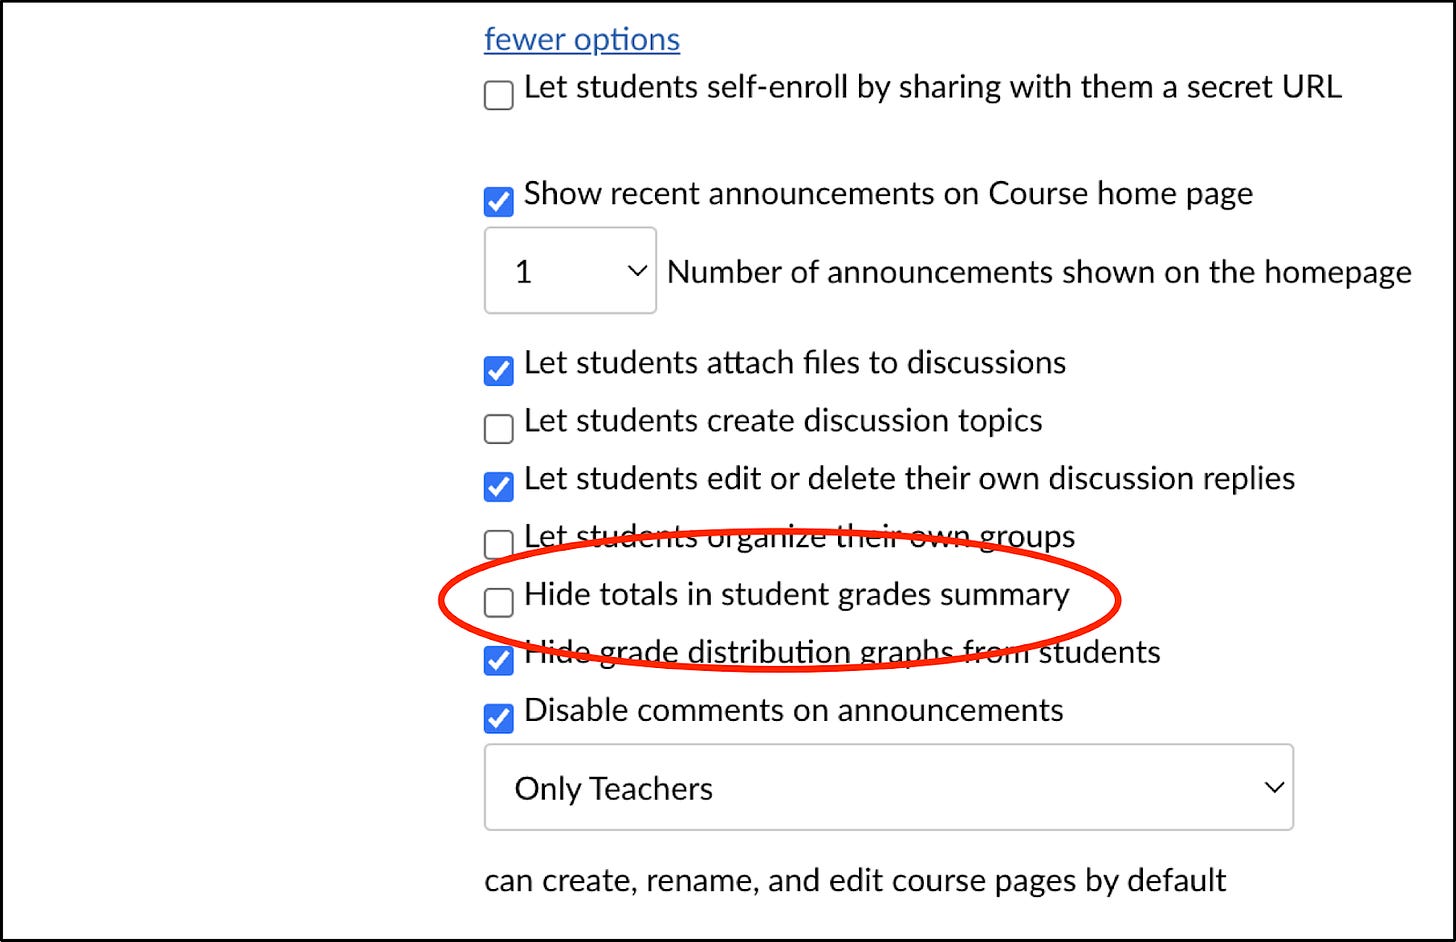 The checkbox for "Hide totals in student grades summary", showing that it should be unchecked.